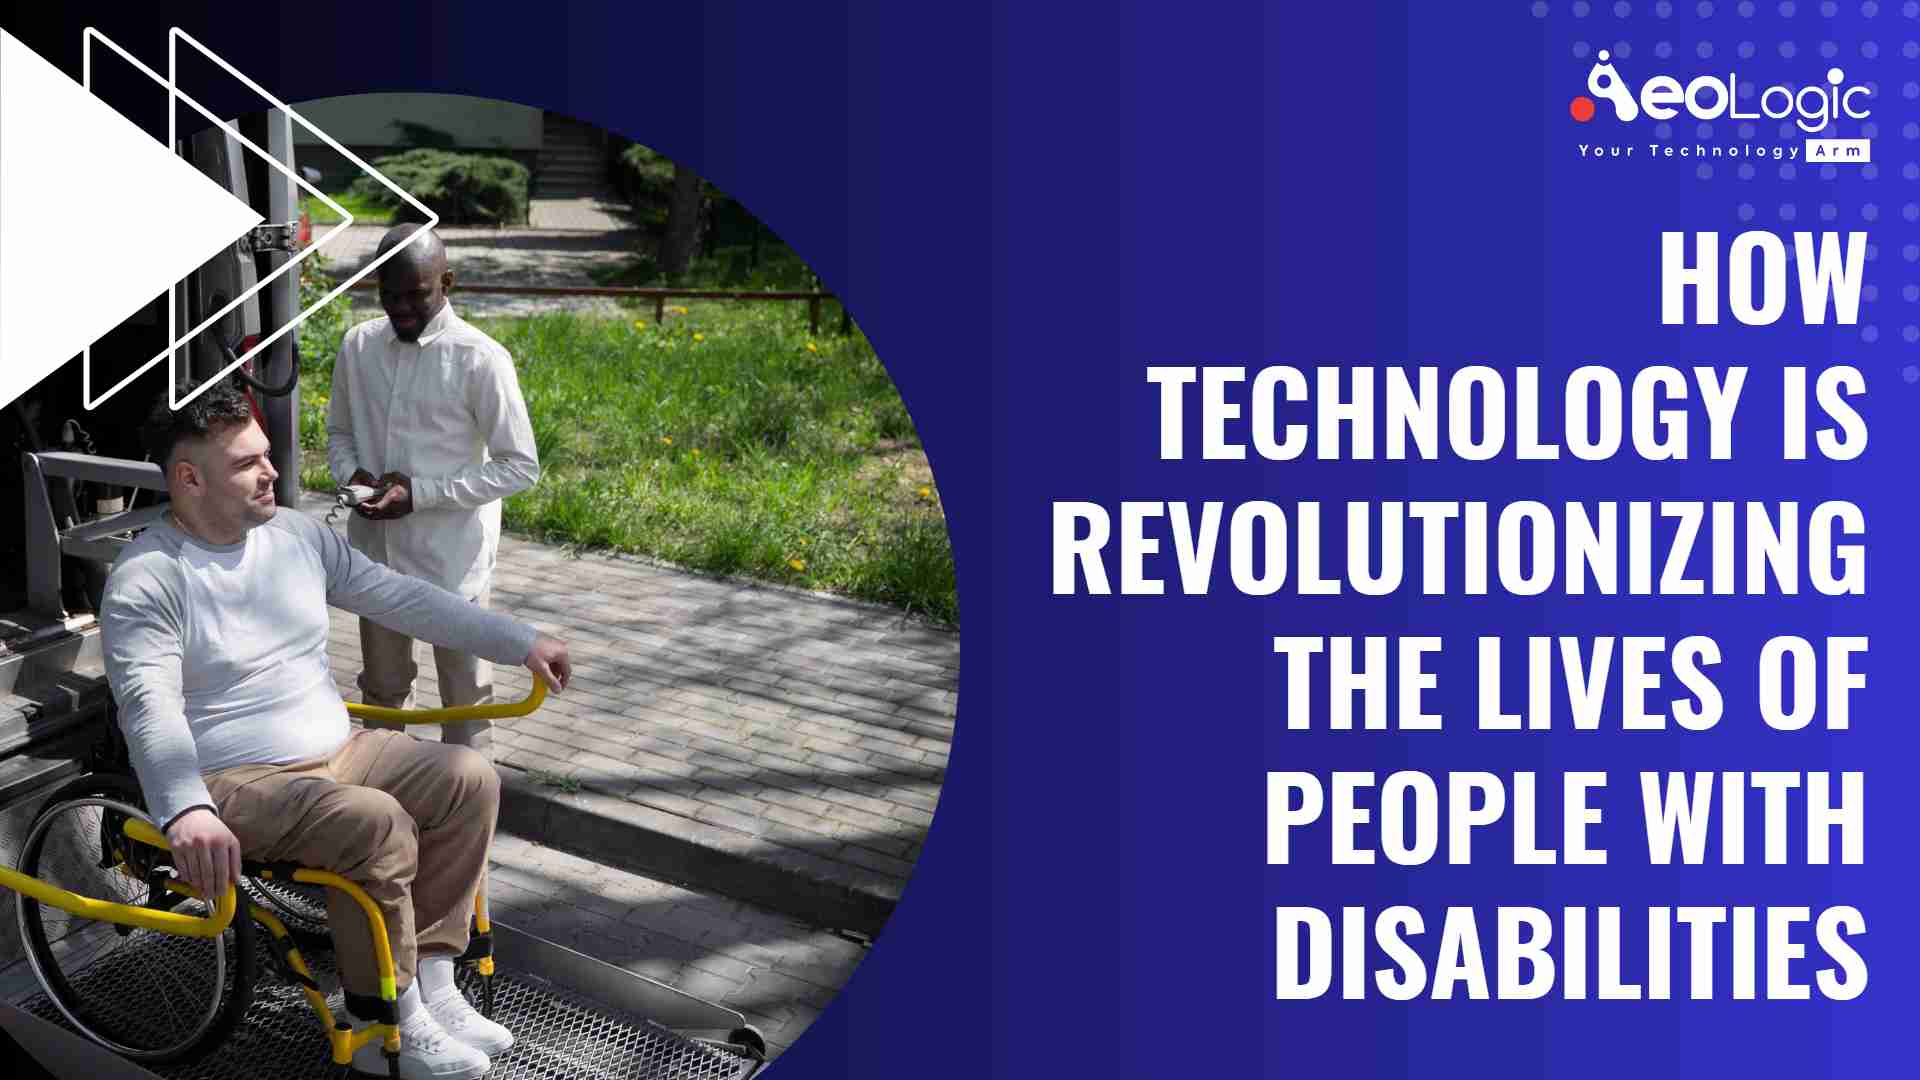 The power of technology for people with disabilities - Source